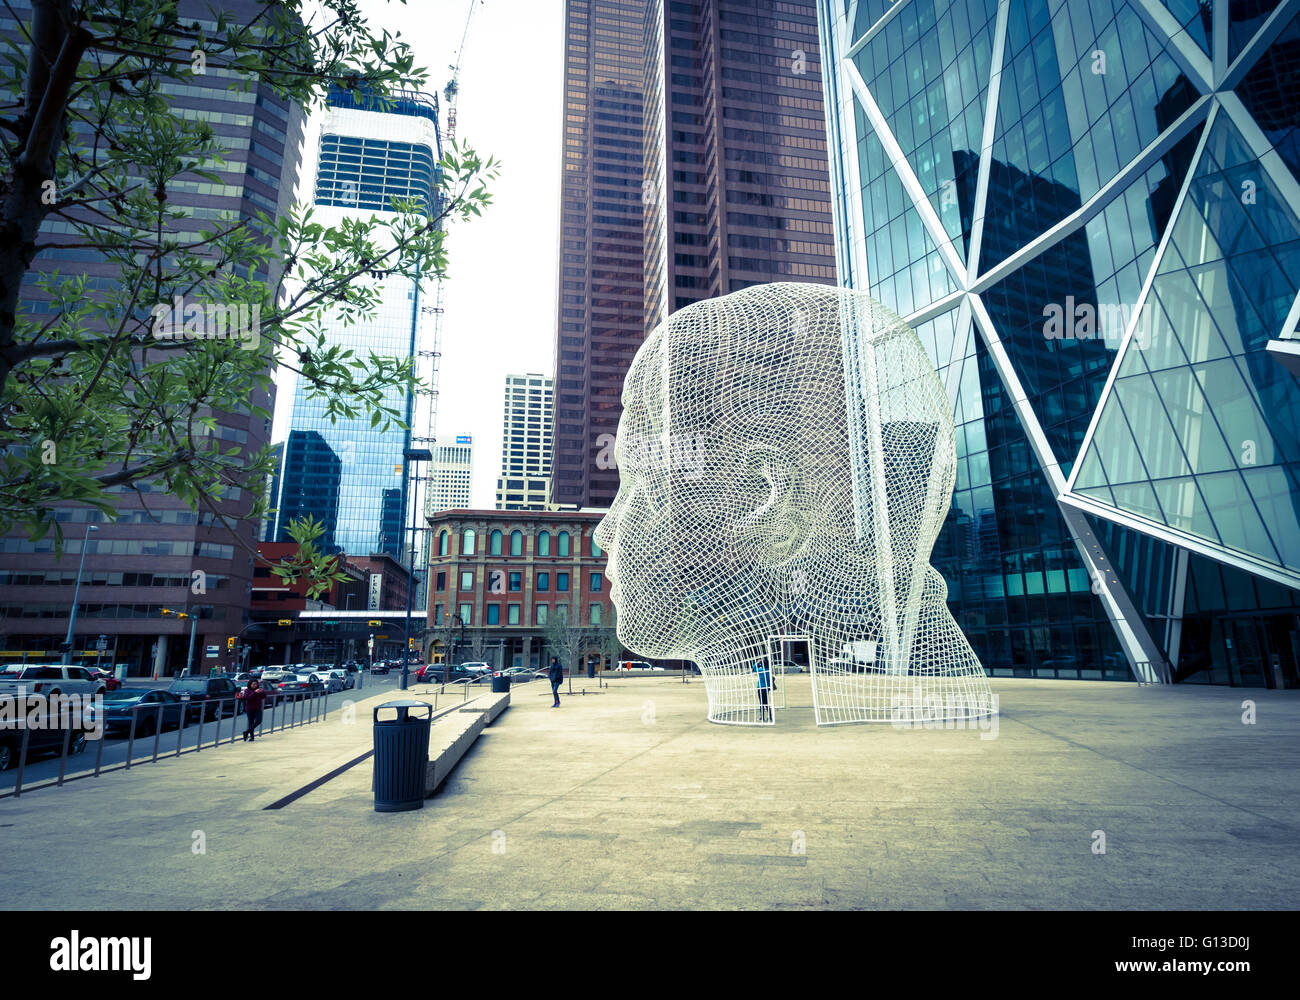 A view of the sculpture Wonderland by Jaume Plensa, in front of The Bow skyscraper in Calgary, Alberta, Canada. Stock Photo